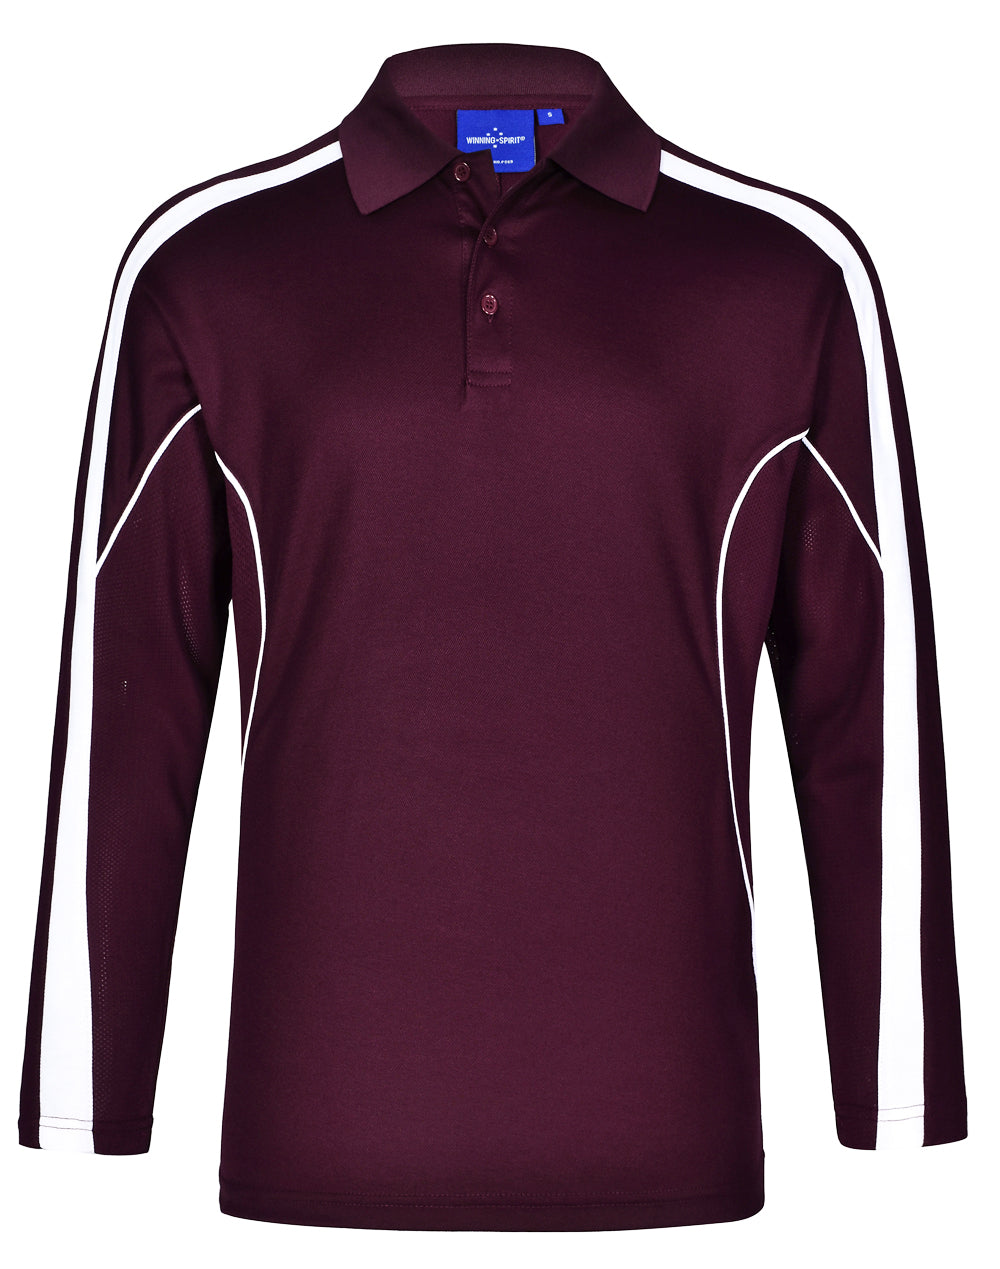 a maroon shirt with white stripes on the sleeves